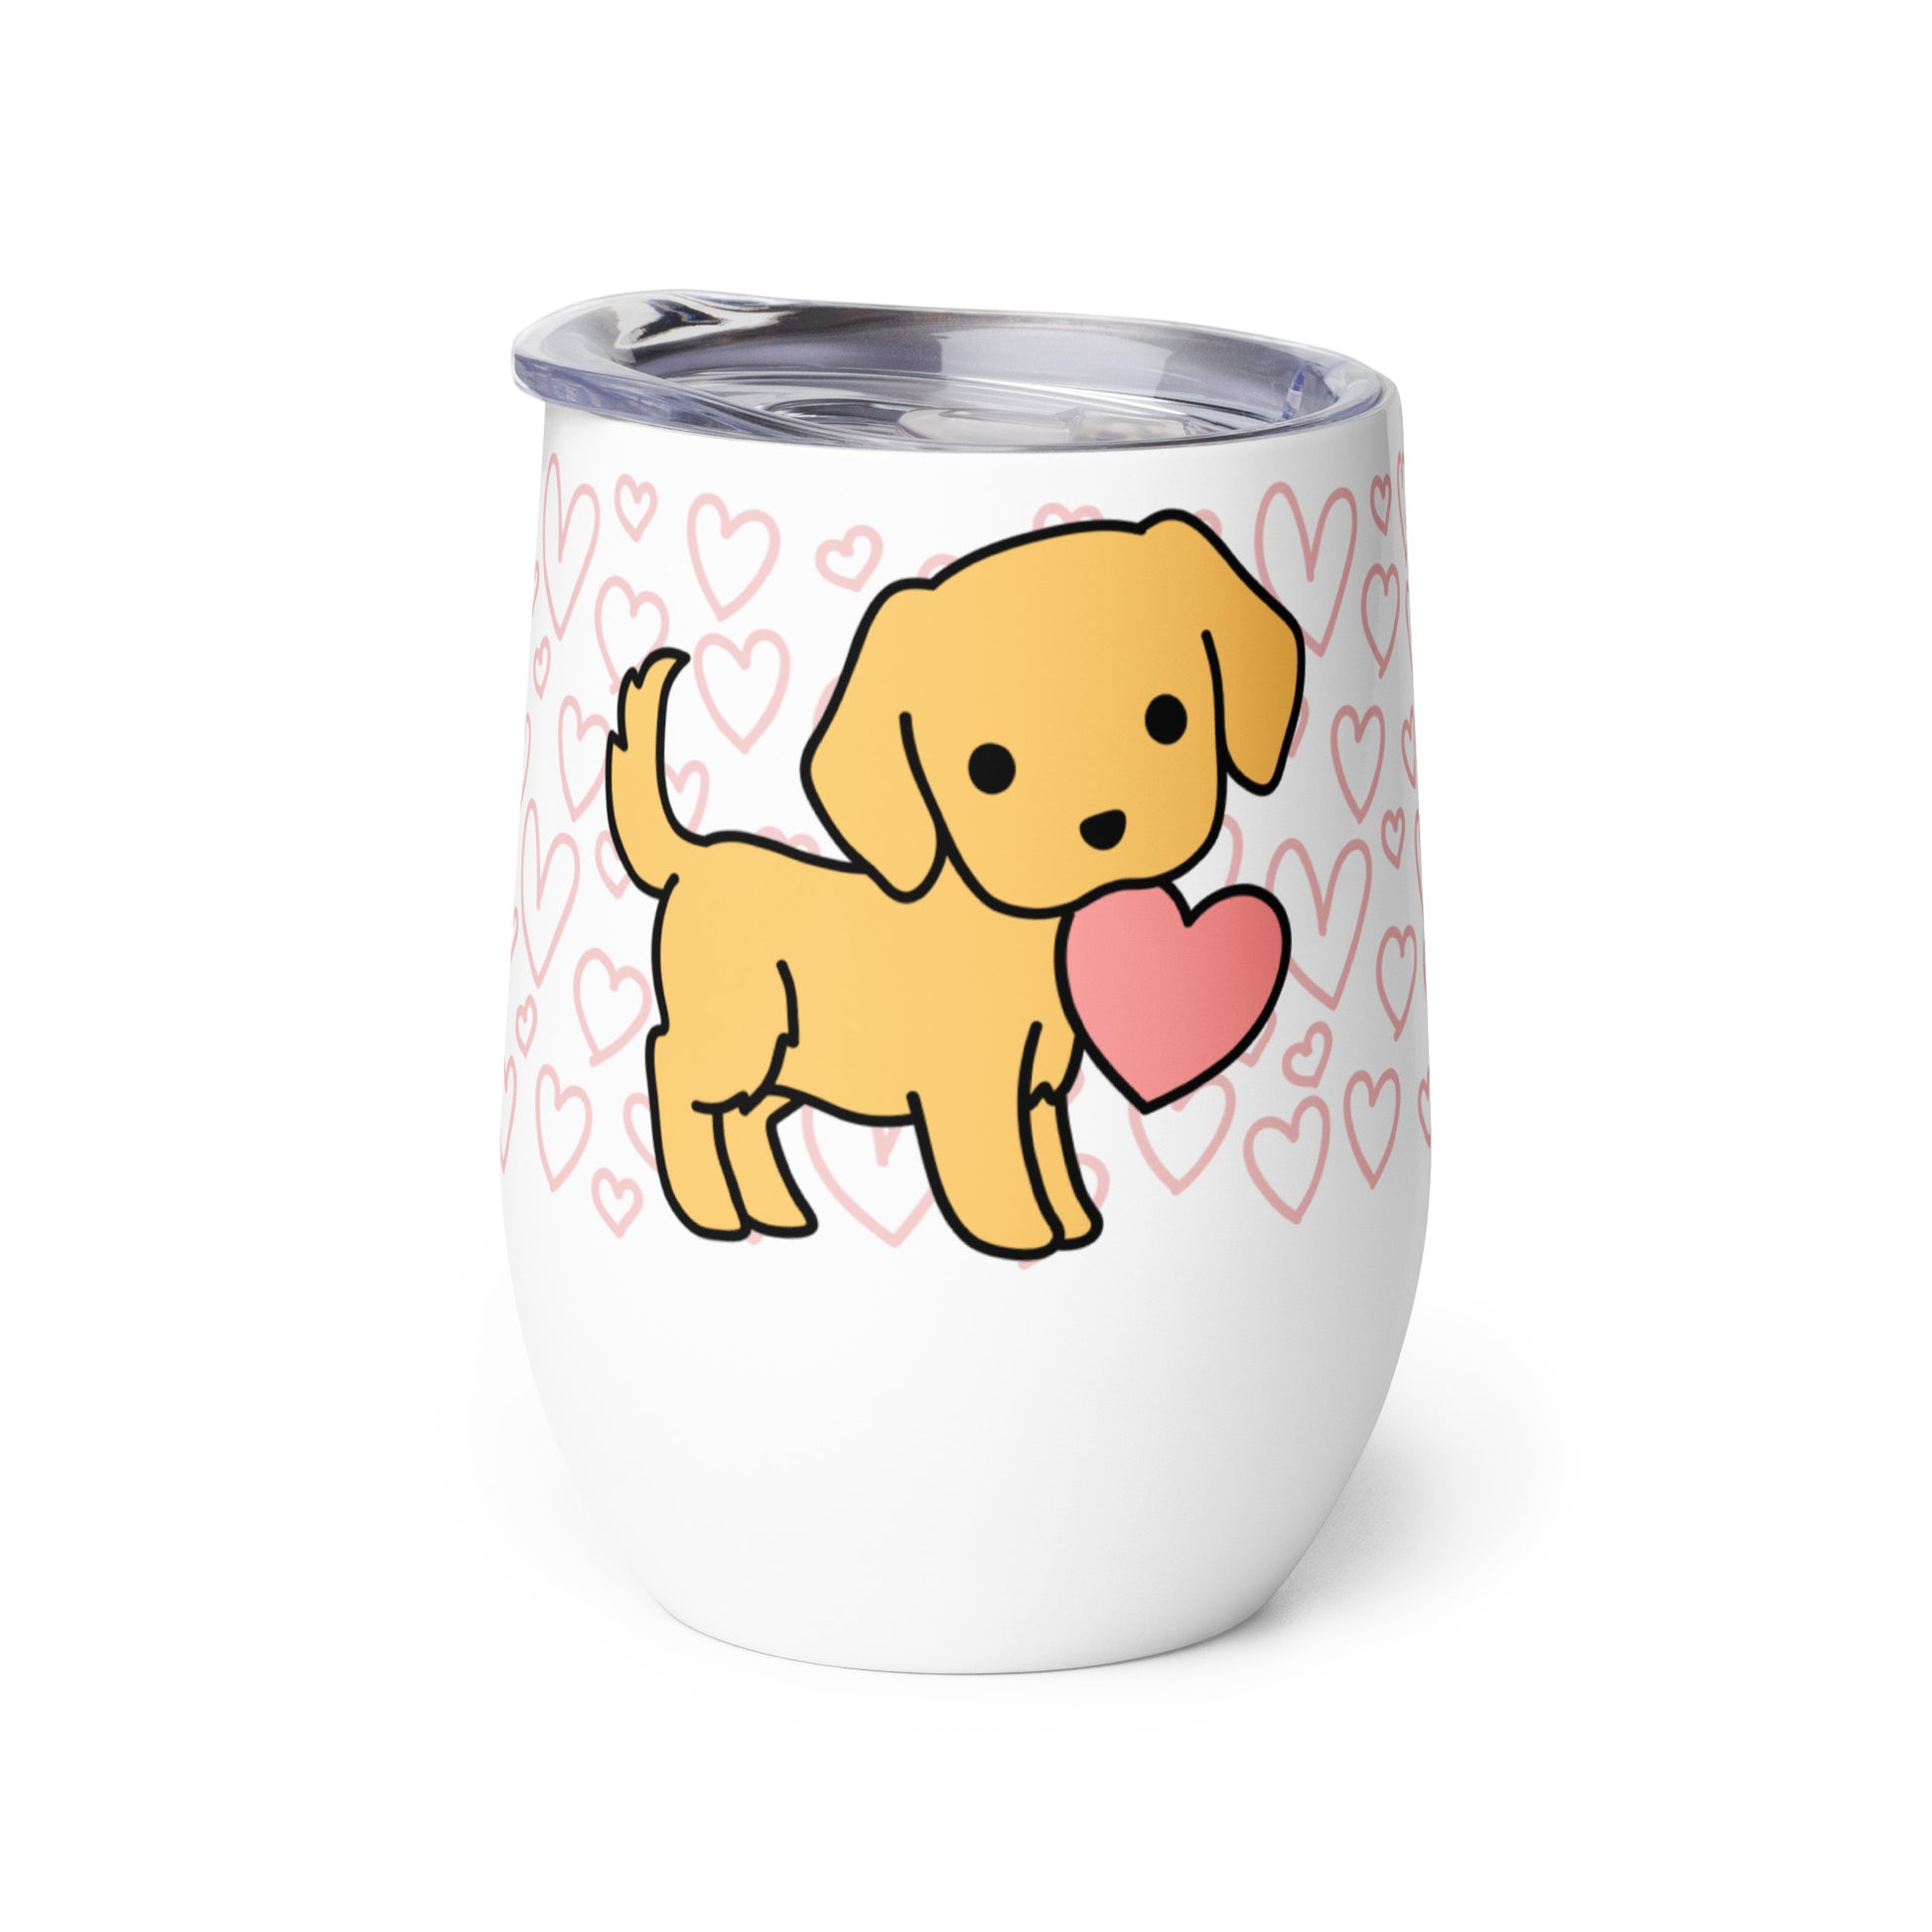 A white metal wine tumbler with a plastic lid. A pattern of hearts wraps around the top half of the tumbler. Centered on the tumbler is a cute, stylized illustration of a Golden Retriever